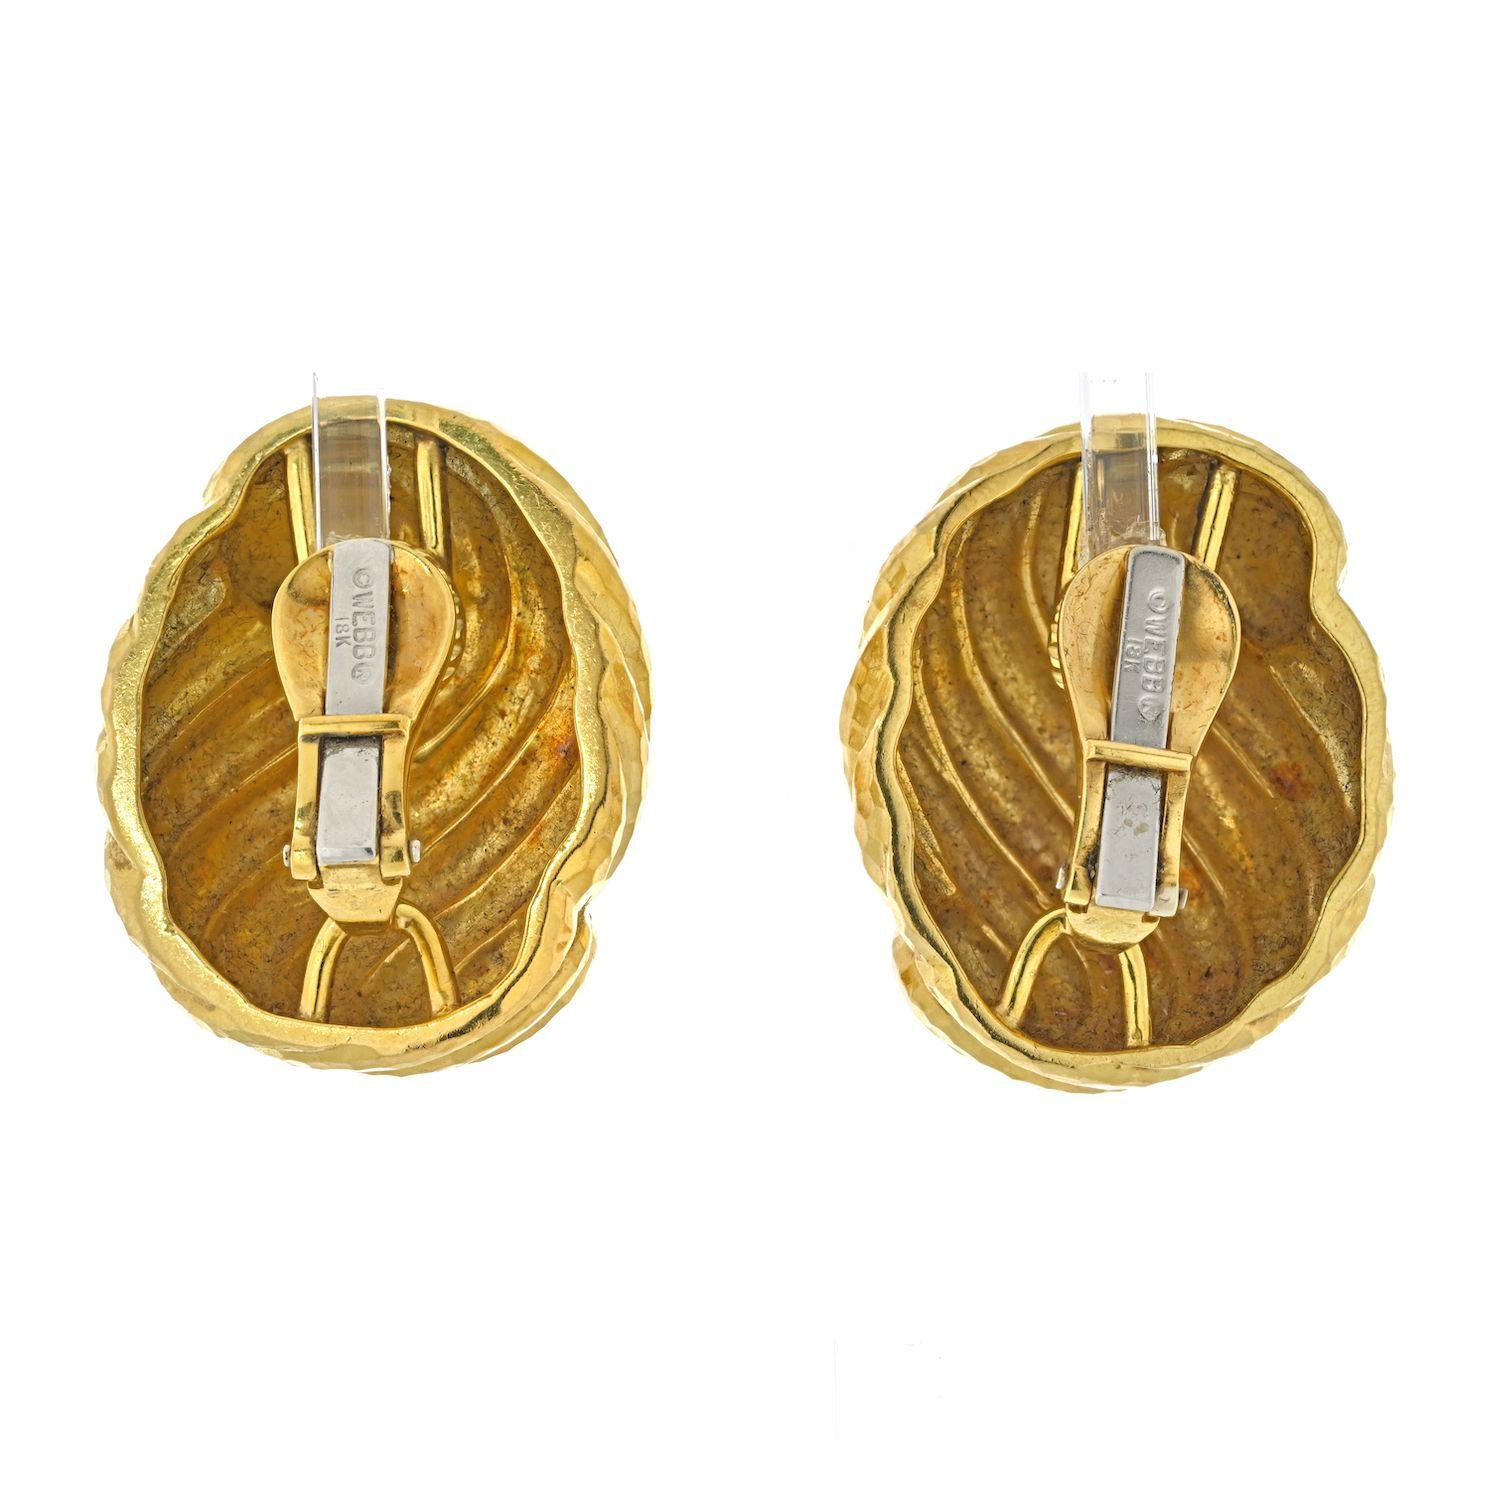 David Webb 18K yellow gold large hammered swirl earrings are a timeless pair of ear clips that are crafted with exceptional quality and attention to detail. The intricate design of the hammered swirls is classic and will never go out of style. The